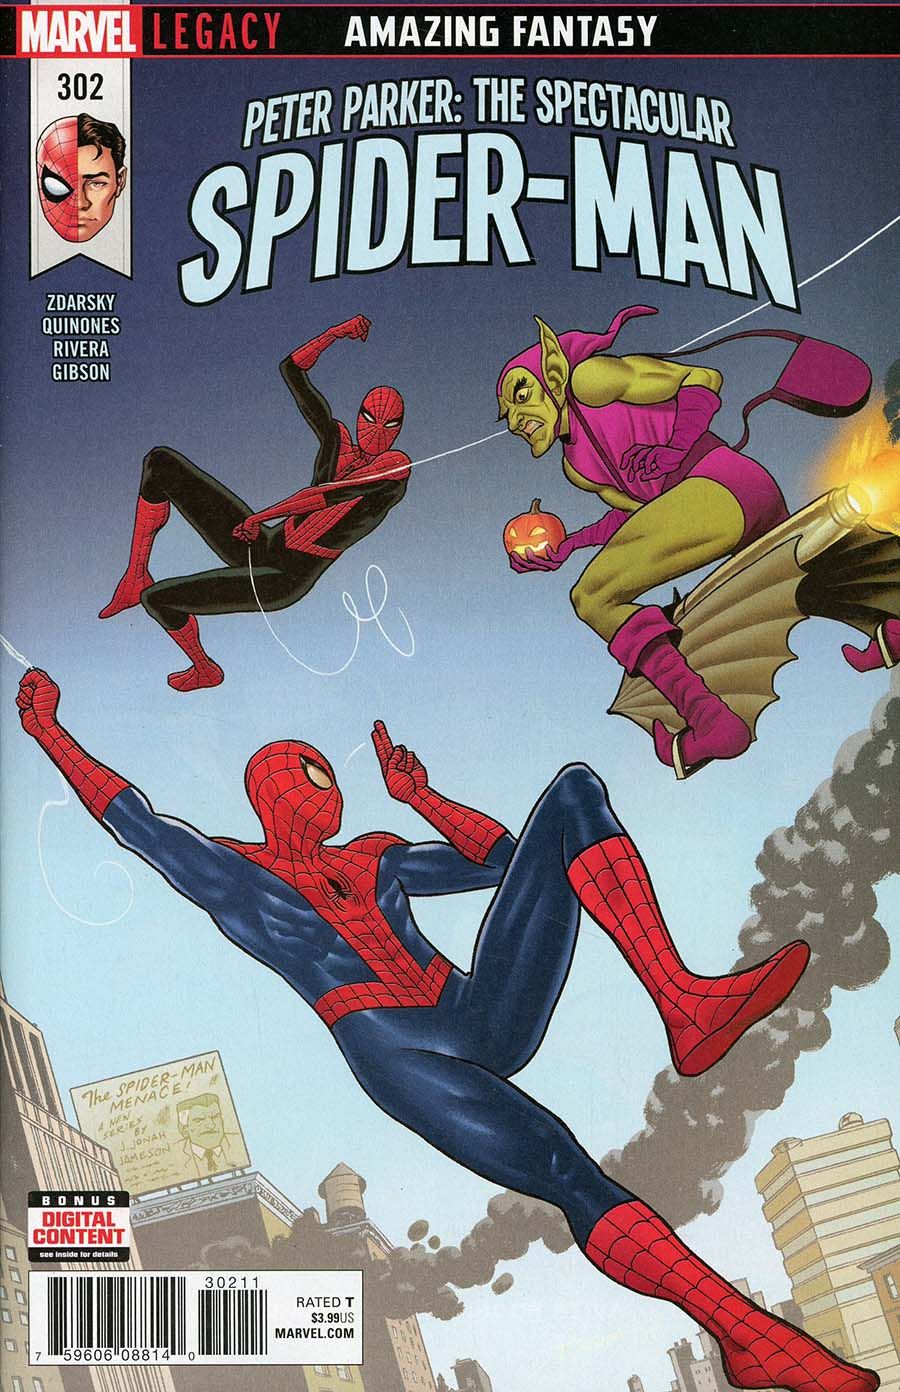 Peter Parker: The Spectacular Spider-man #302 Comic